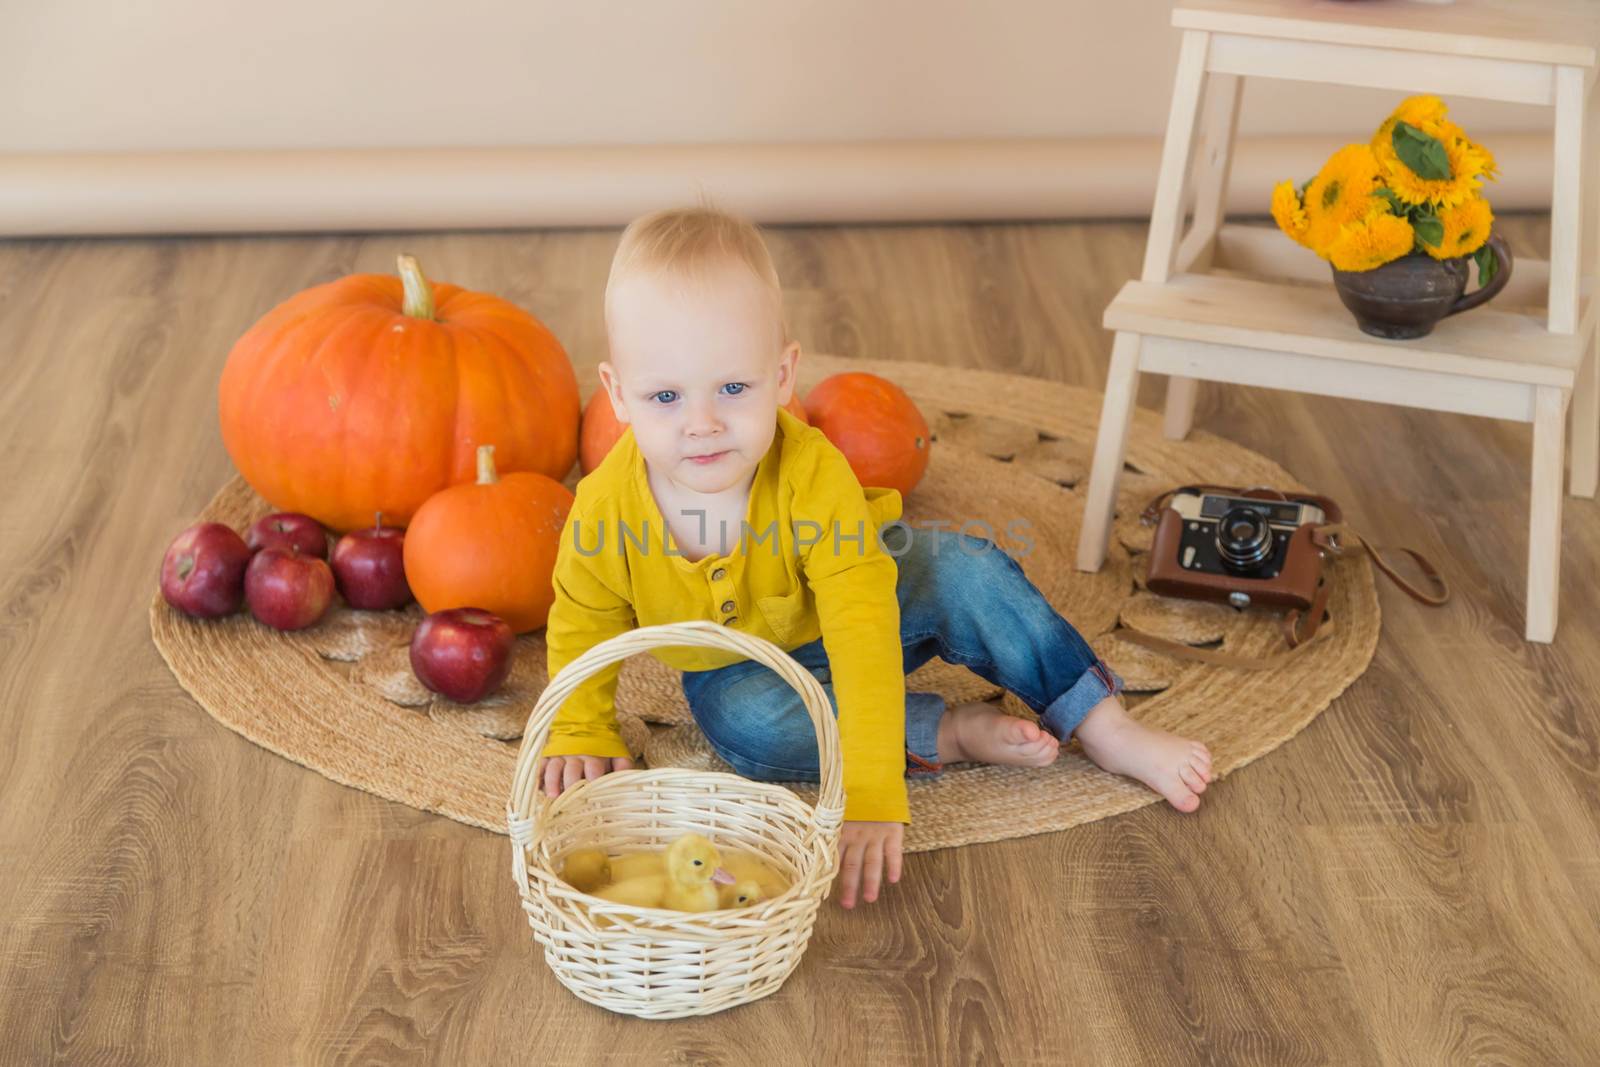 A little boy sits among pumpkins with a basket of ducklings by galinasharapova